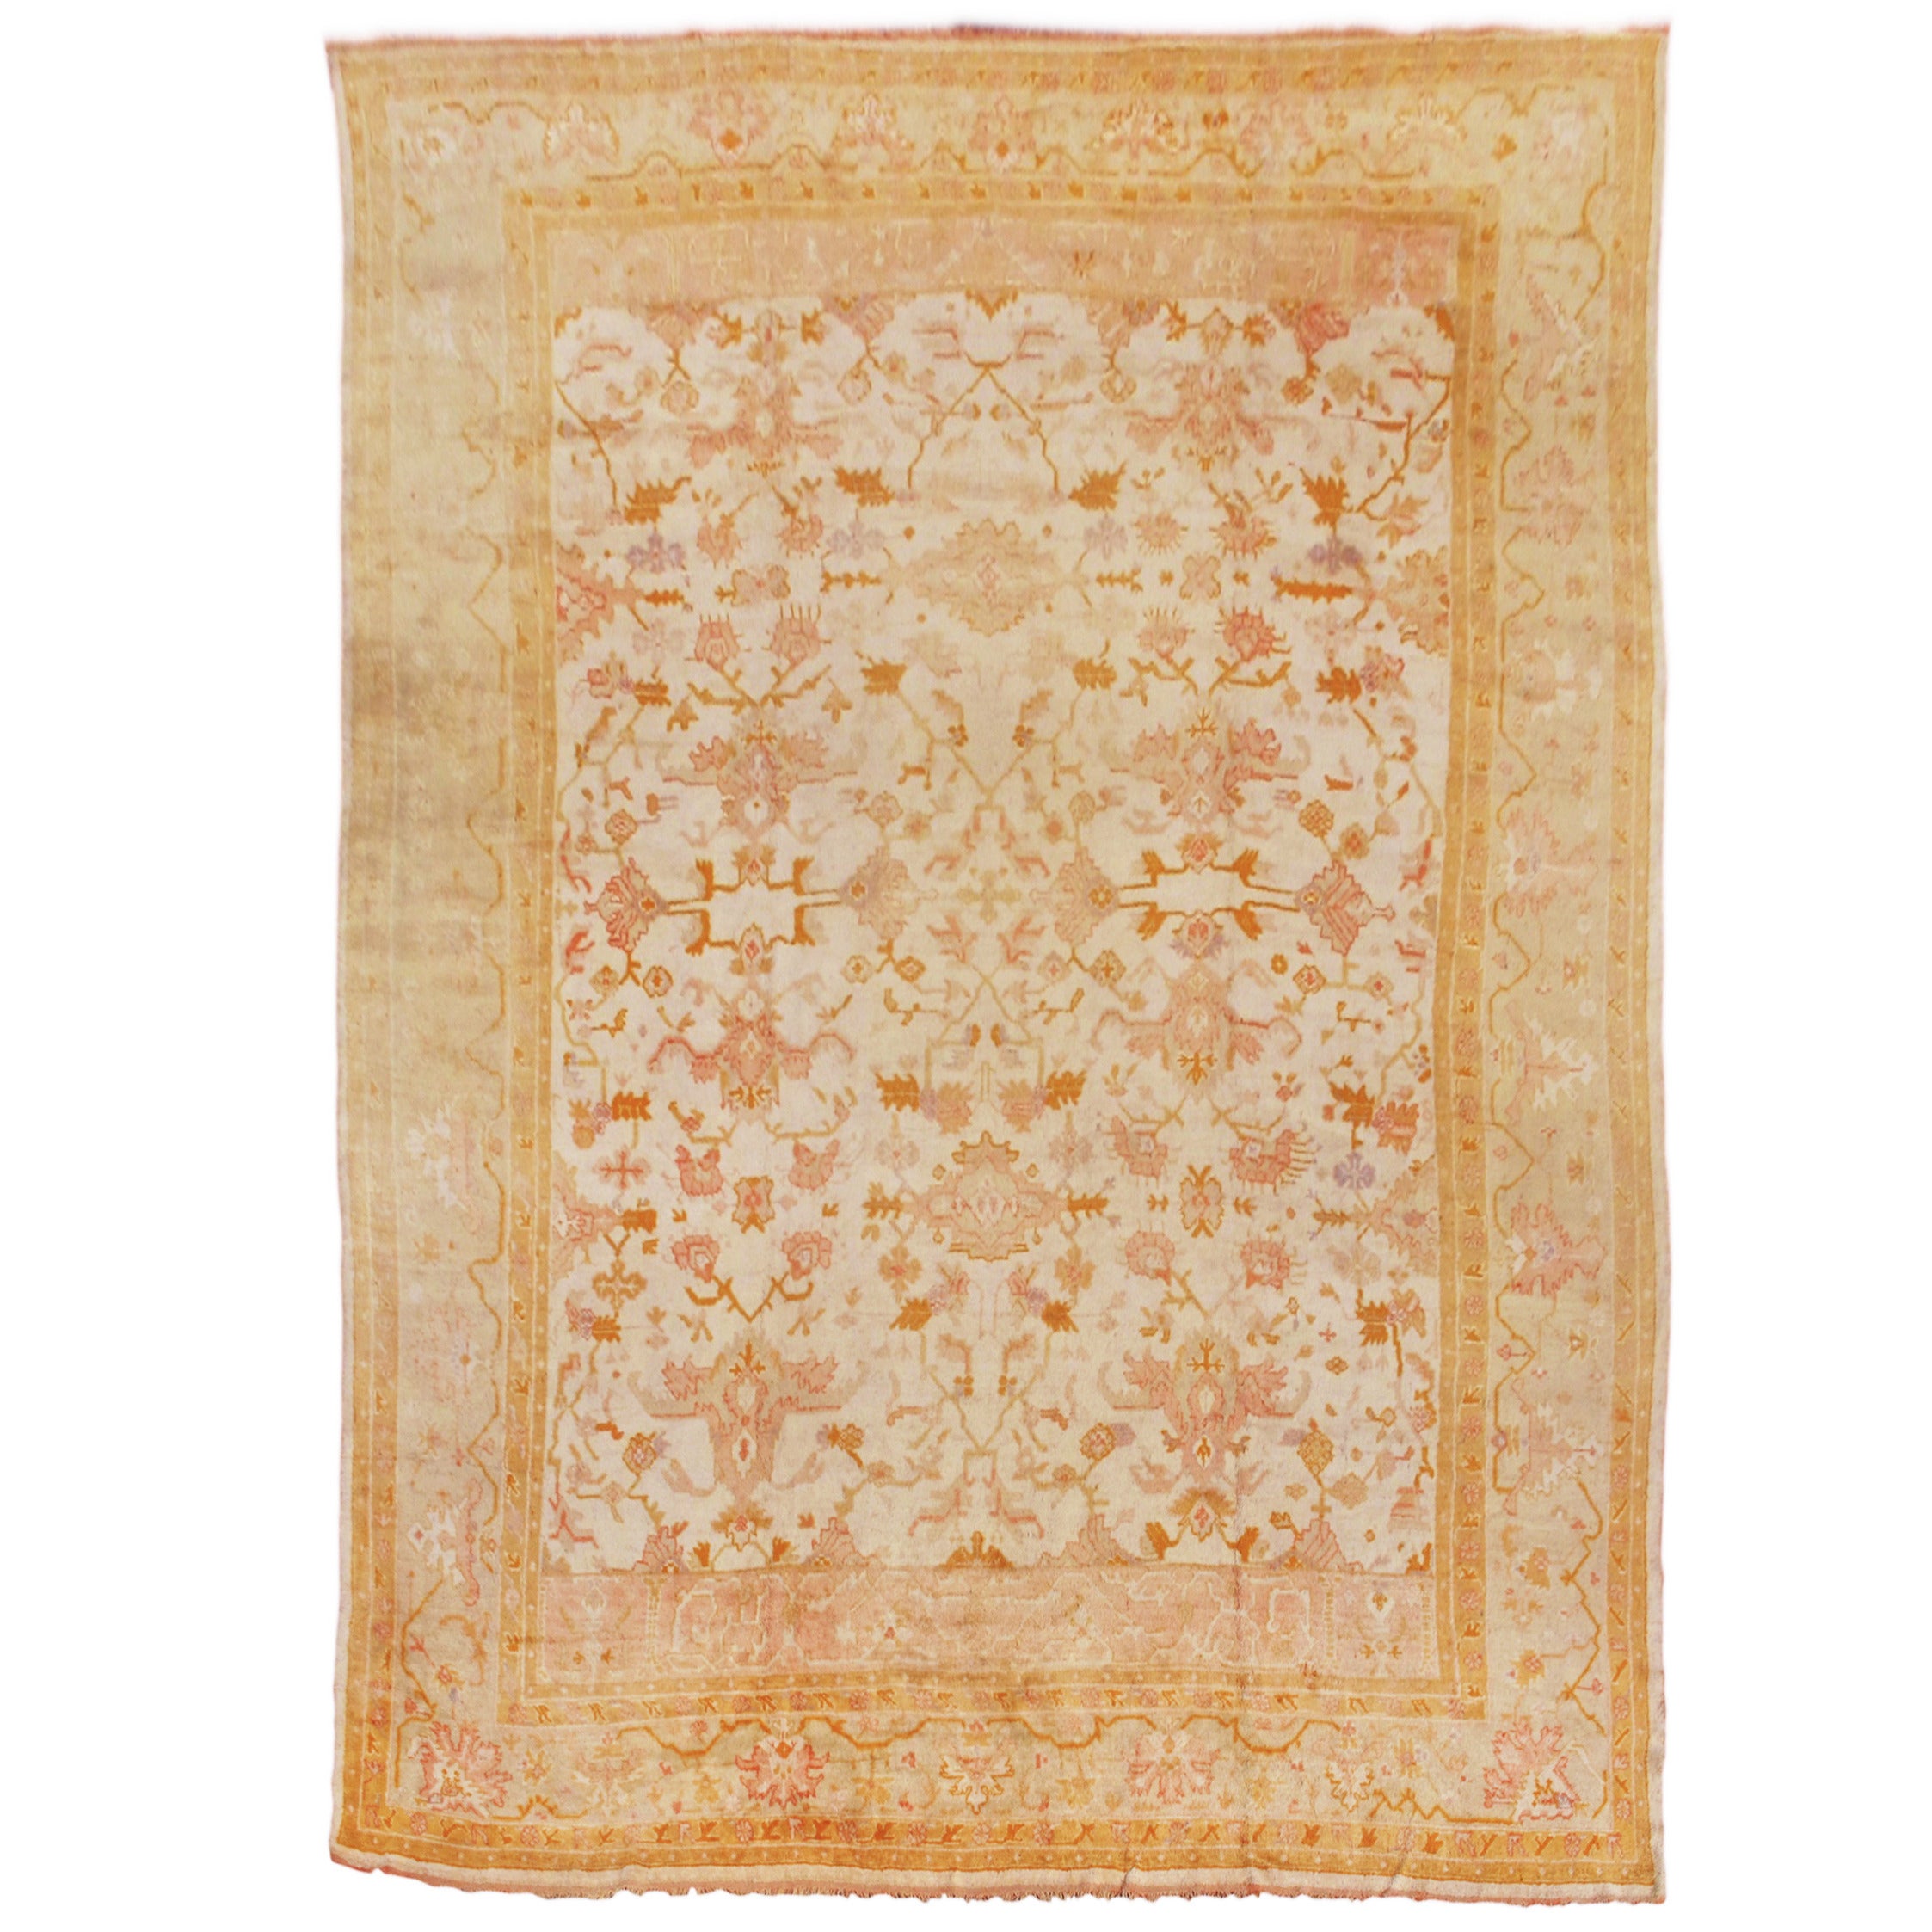 Early 20th Century Gold and Khaki Oushak Carpet For Sale